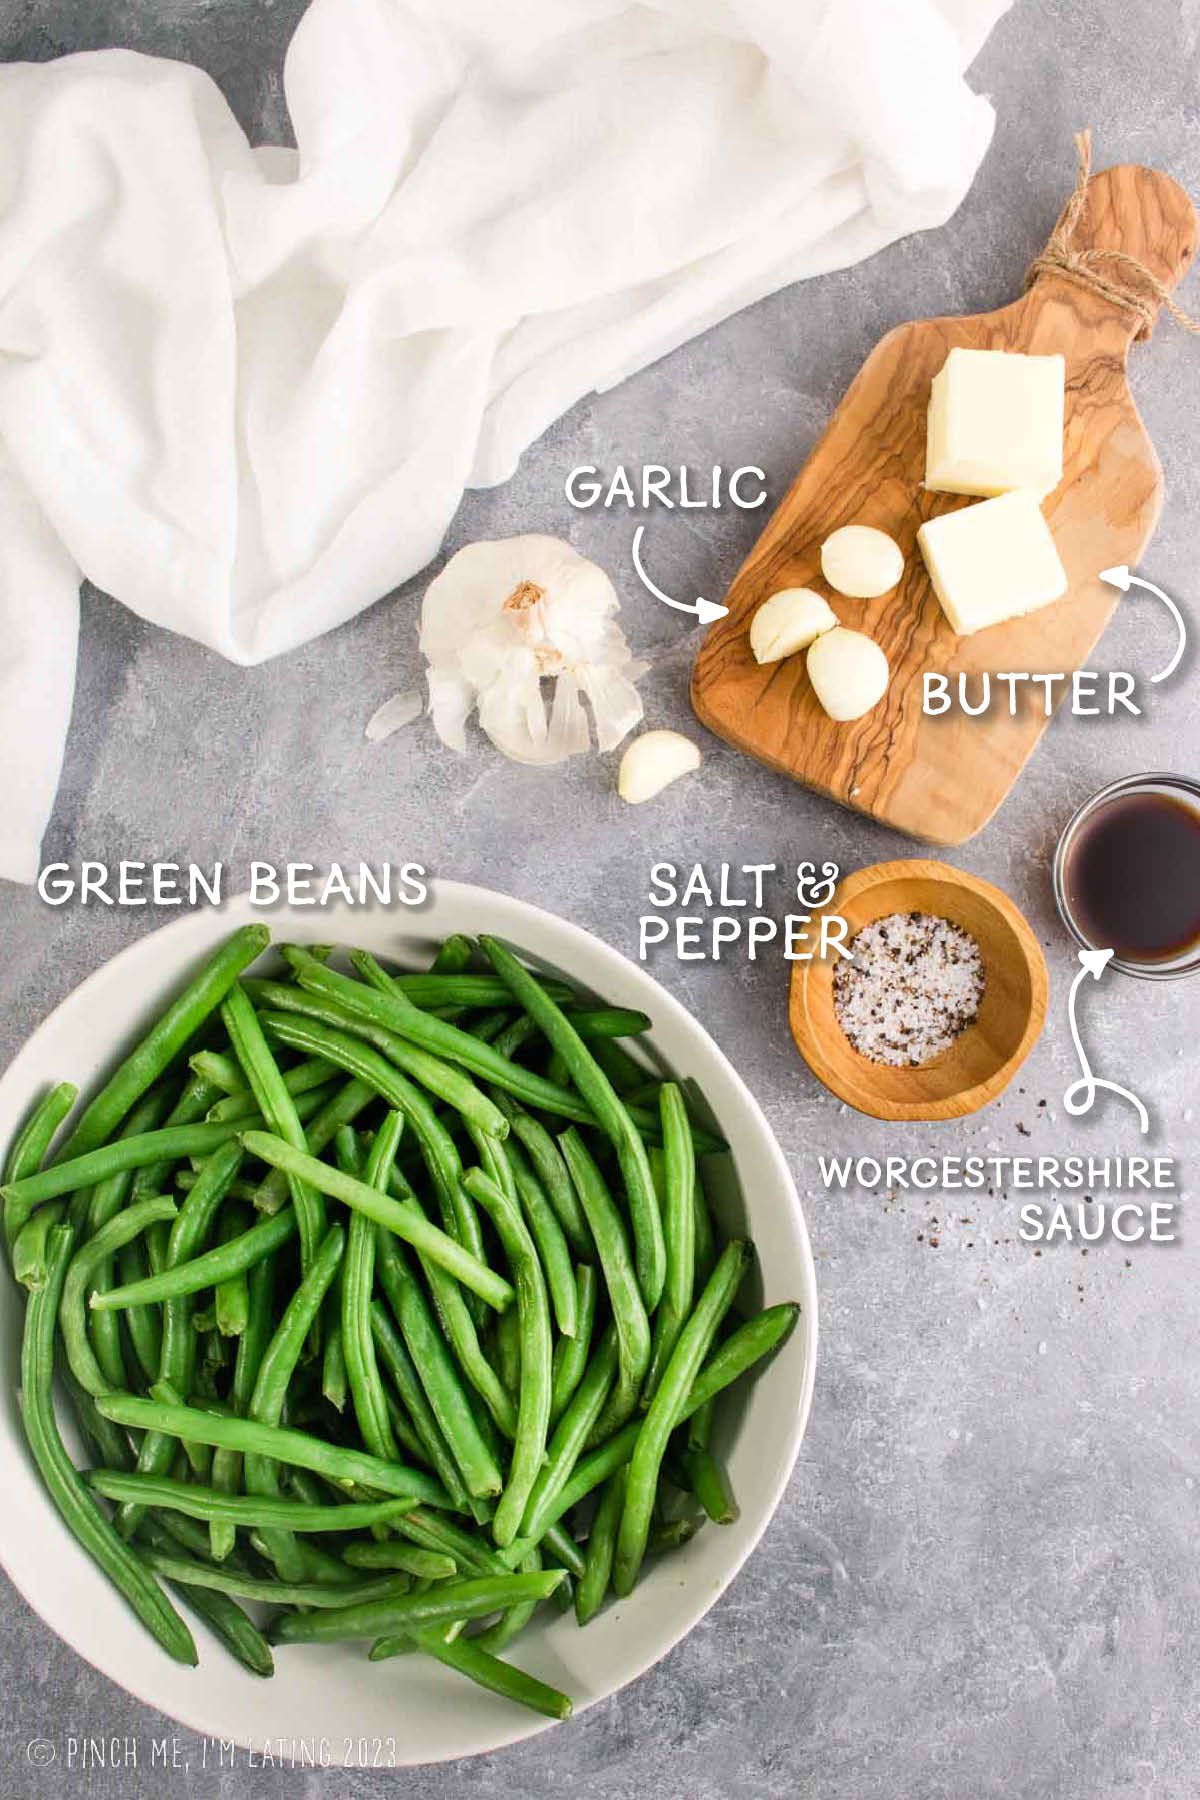 Ingredients for steakhouse style garlic butter green beans.